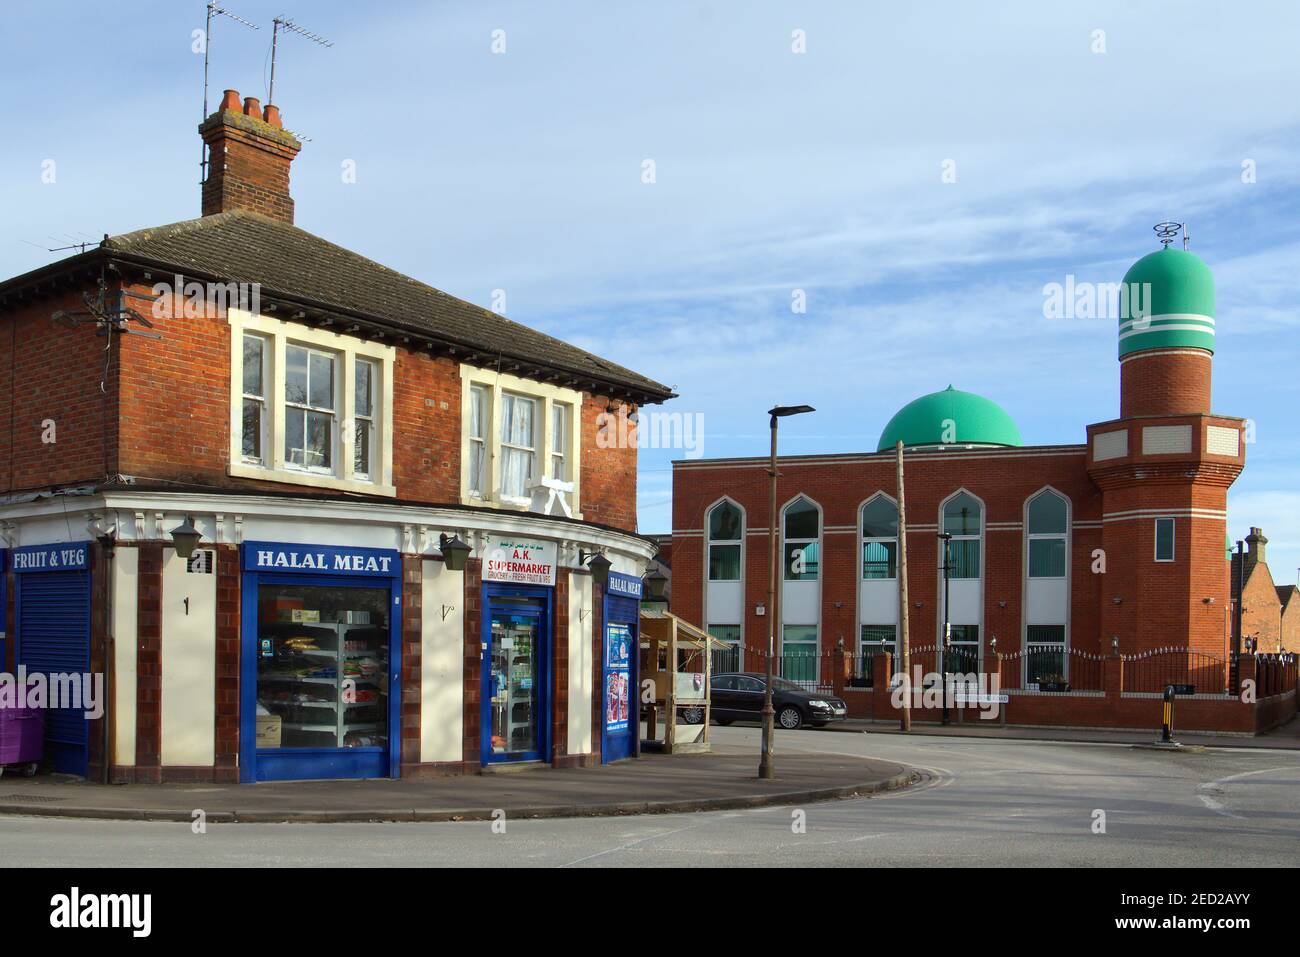 Jameh Masjid Gulshan-e-Bagdhad Mosque and halal butchers shop at Queens Park, Bedford - muslim place of worship at Bedford, Bedfordshire, UK Stock Photo